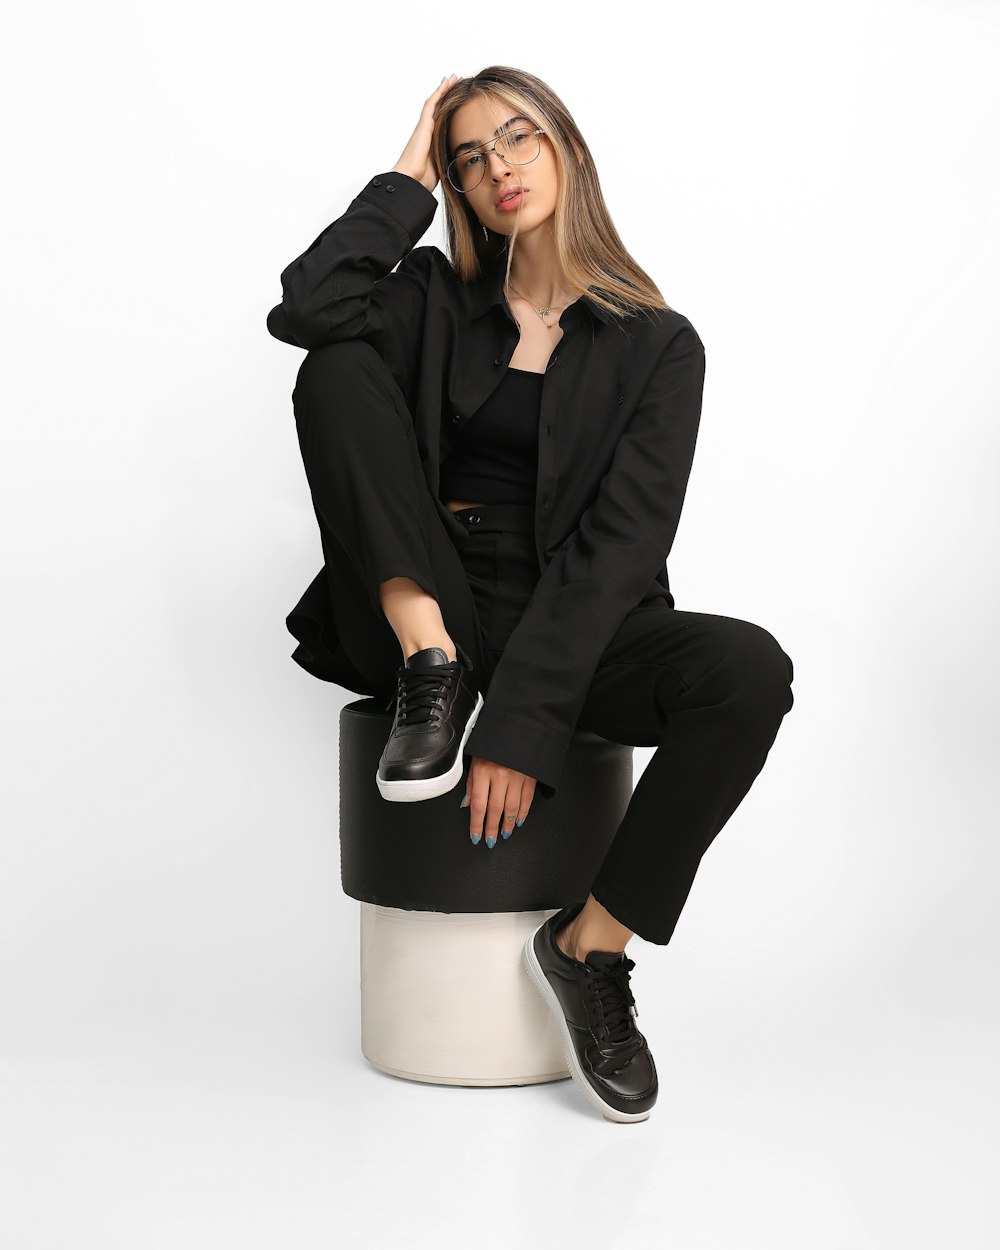 a woman sitting on top of a stool